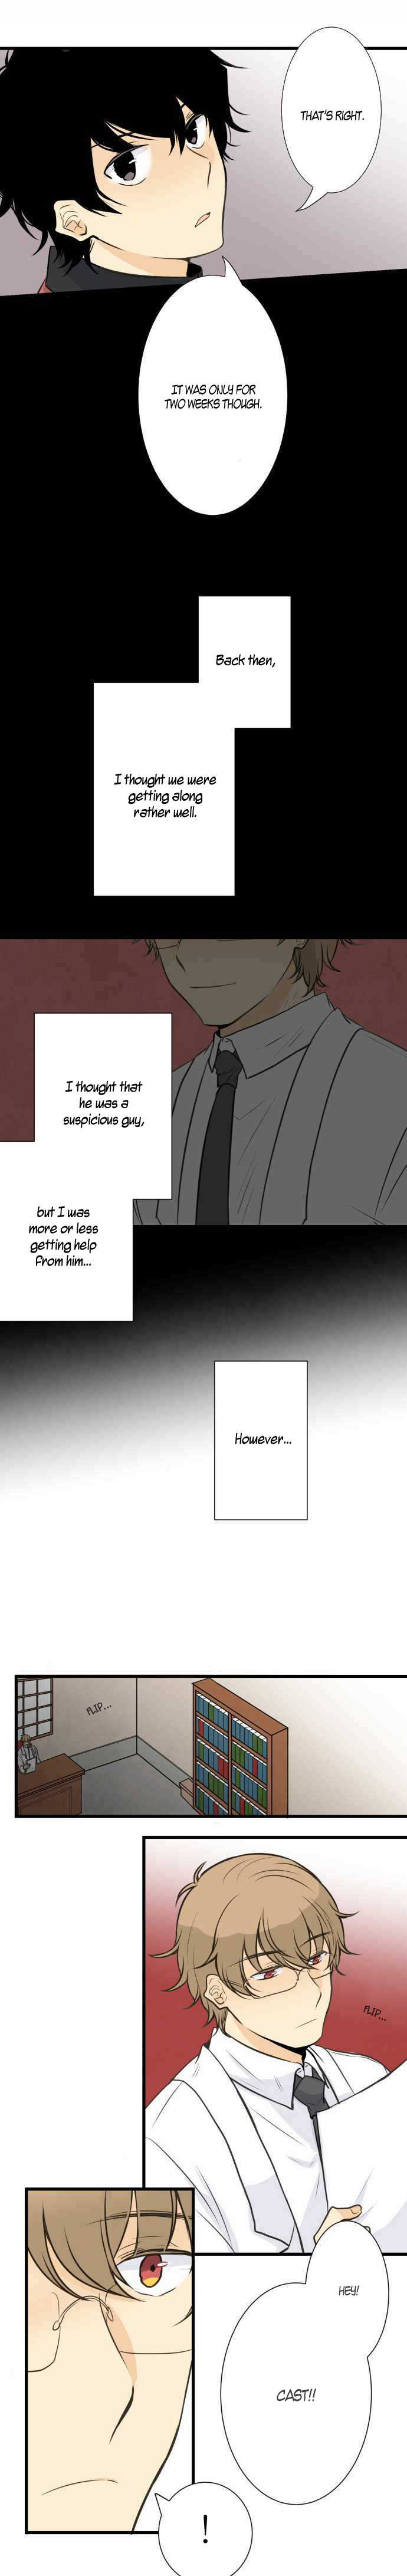 Our Amnesia Ch. 7 Contact (2)